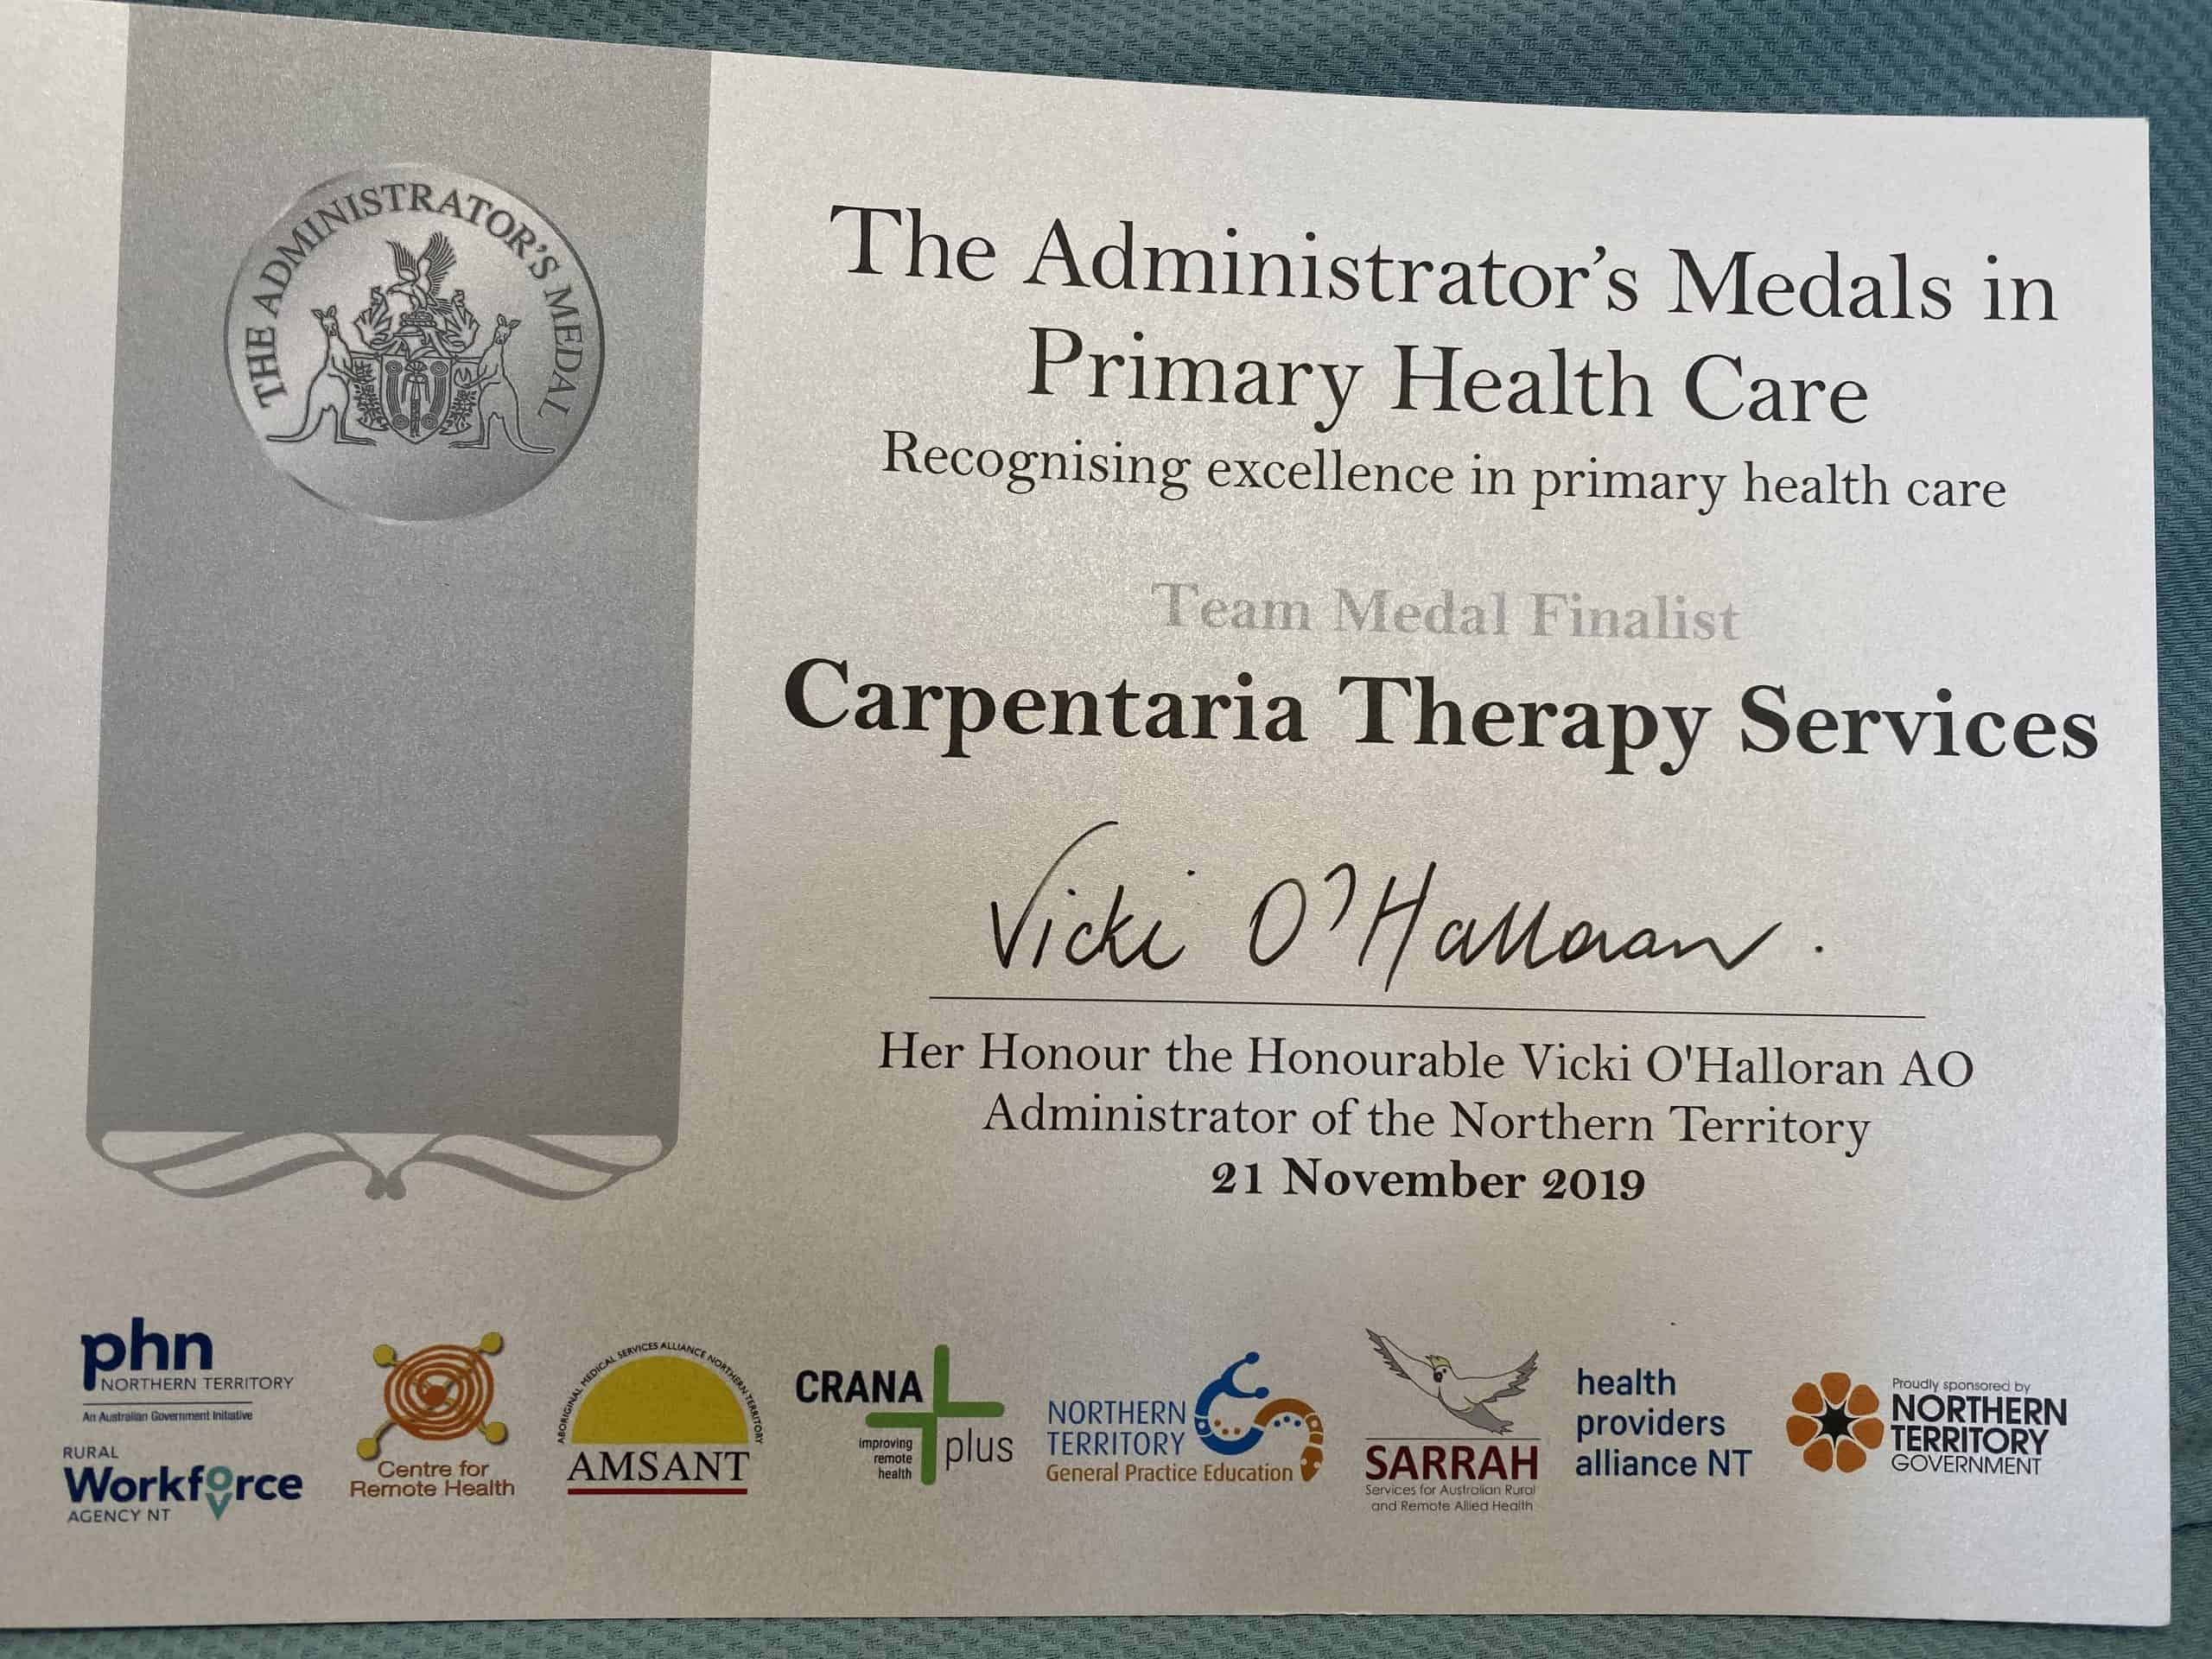 Therapy Services team recognised